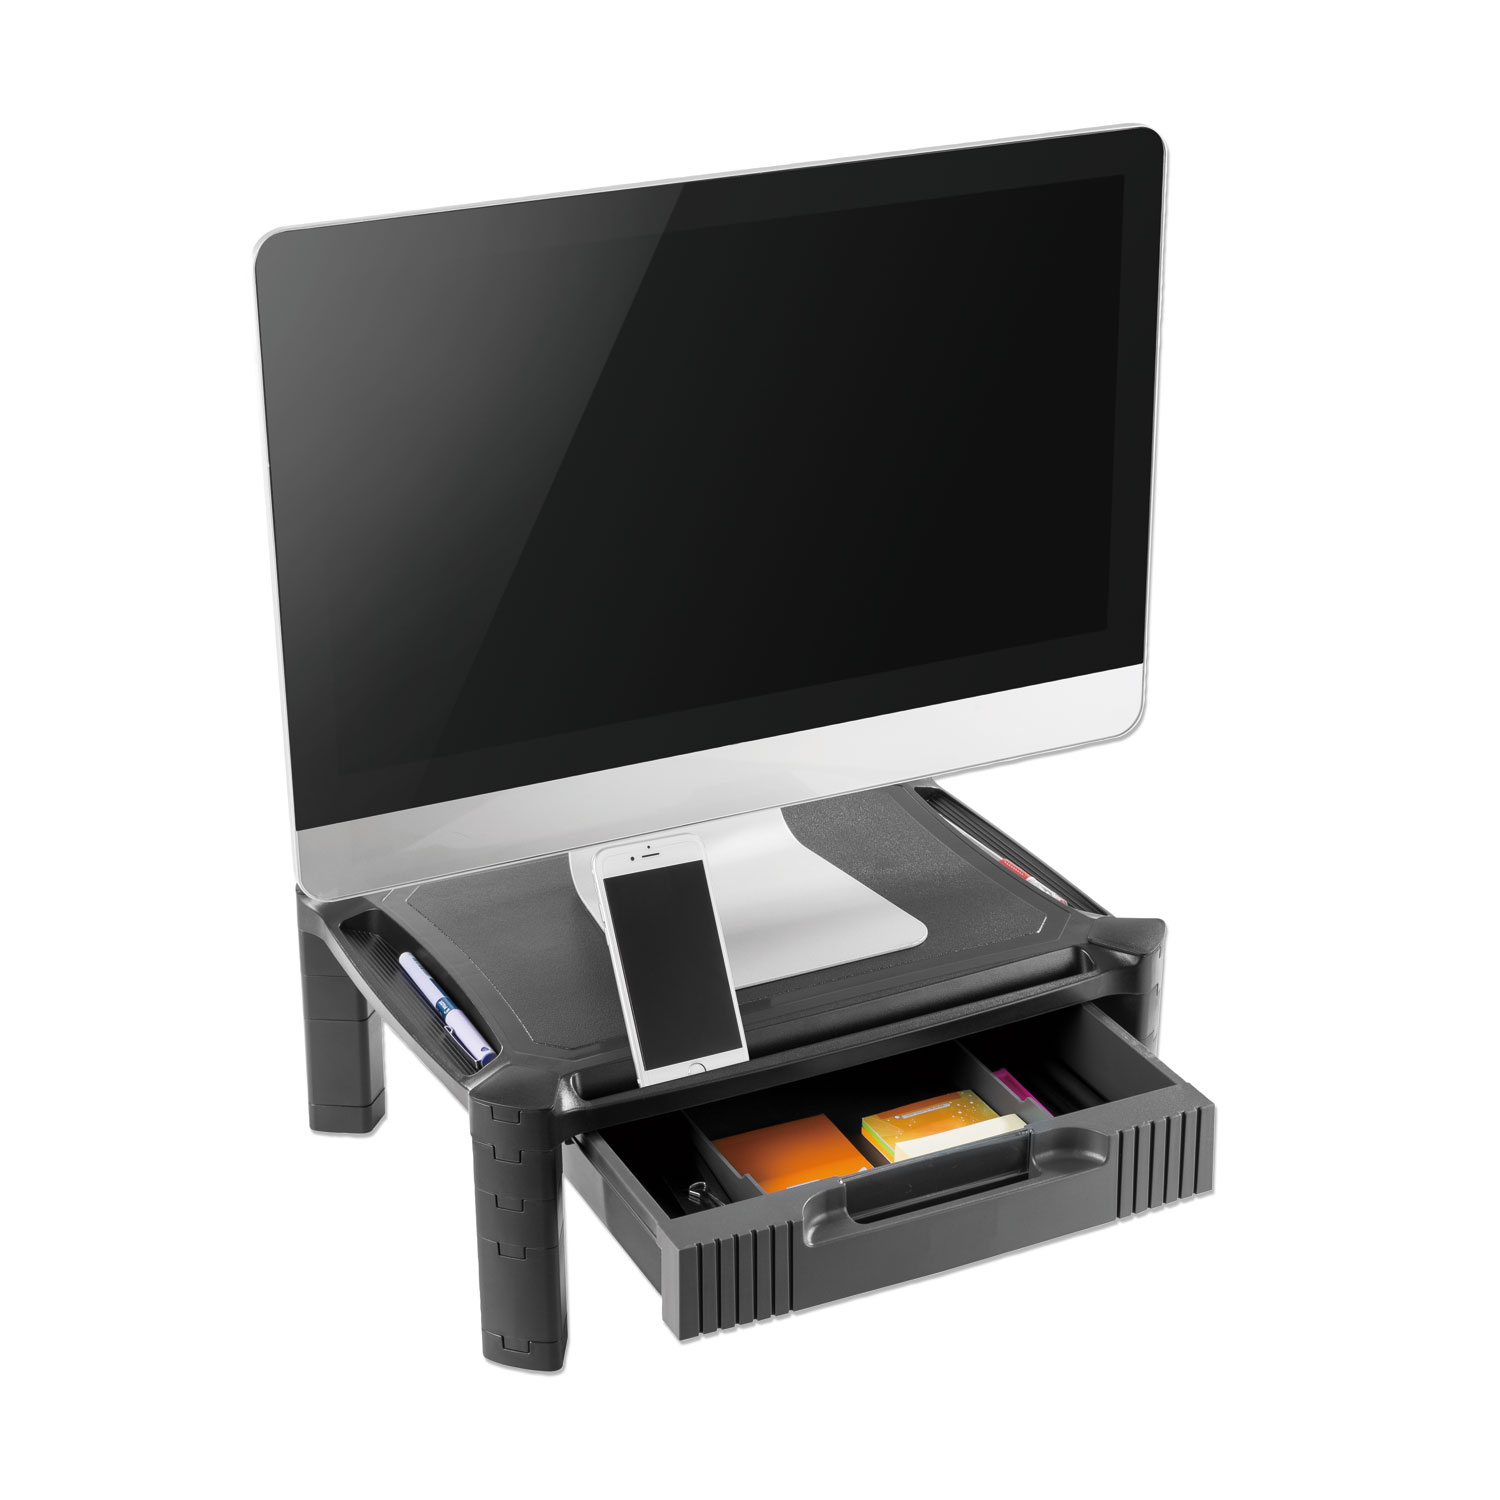  Innovera IVR55050 Large Monitor Stand with Cable Management and Drawer, 18 3/8 x 13 5/8 x 5 (IVR55050) 